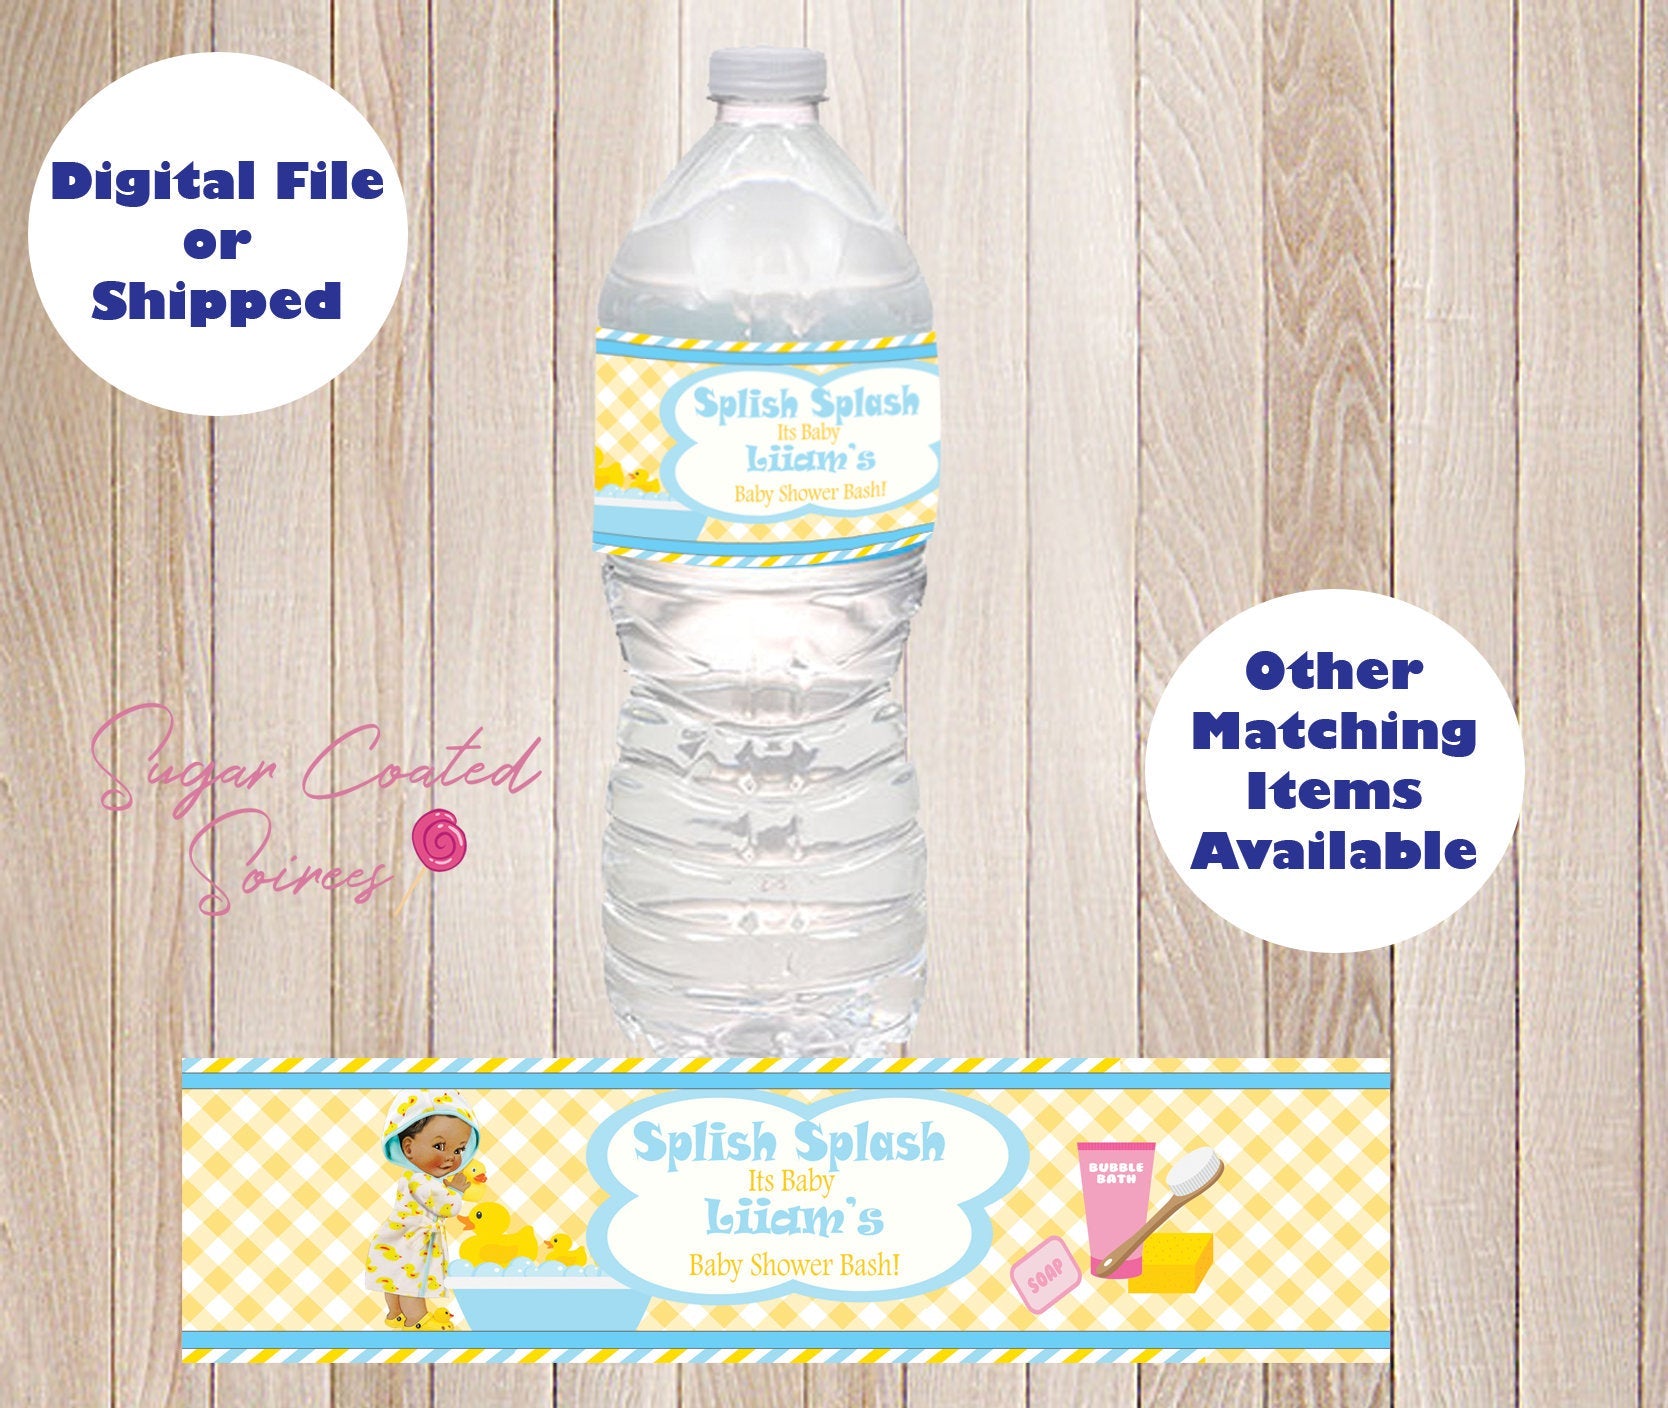 SHIPPED Royal Baby Rubber Duck Baby Shower Personalized Water Bottle Label, Birthday Party Favor DIY